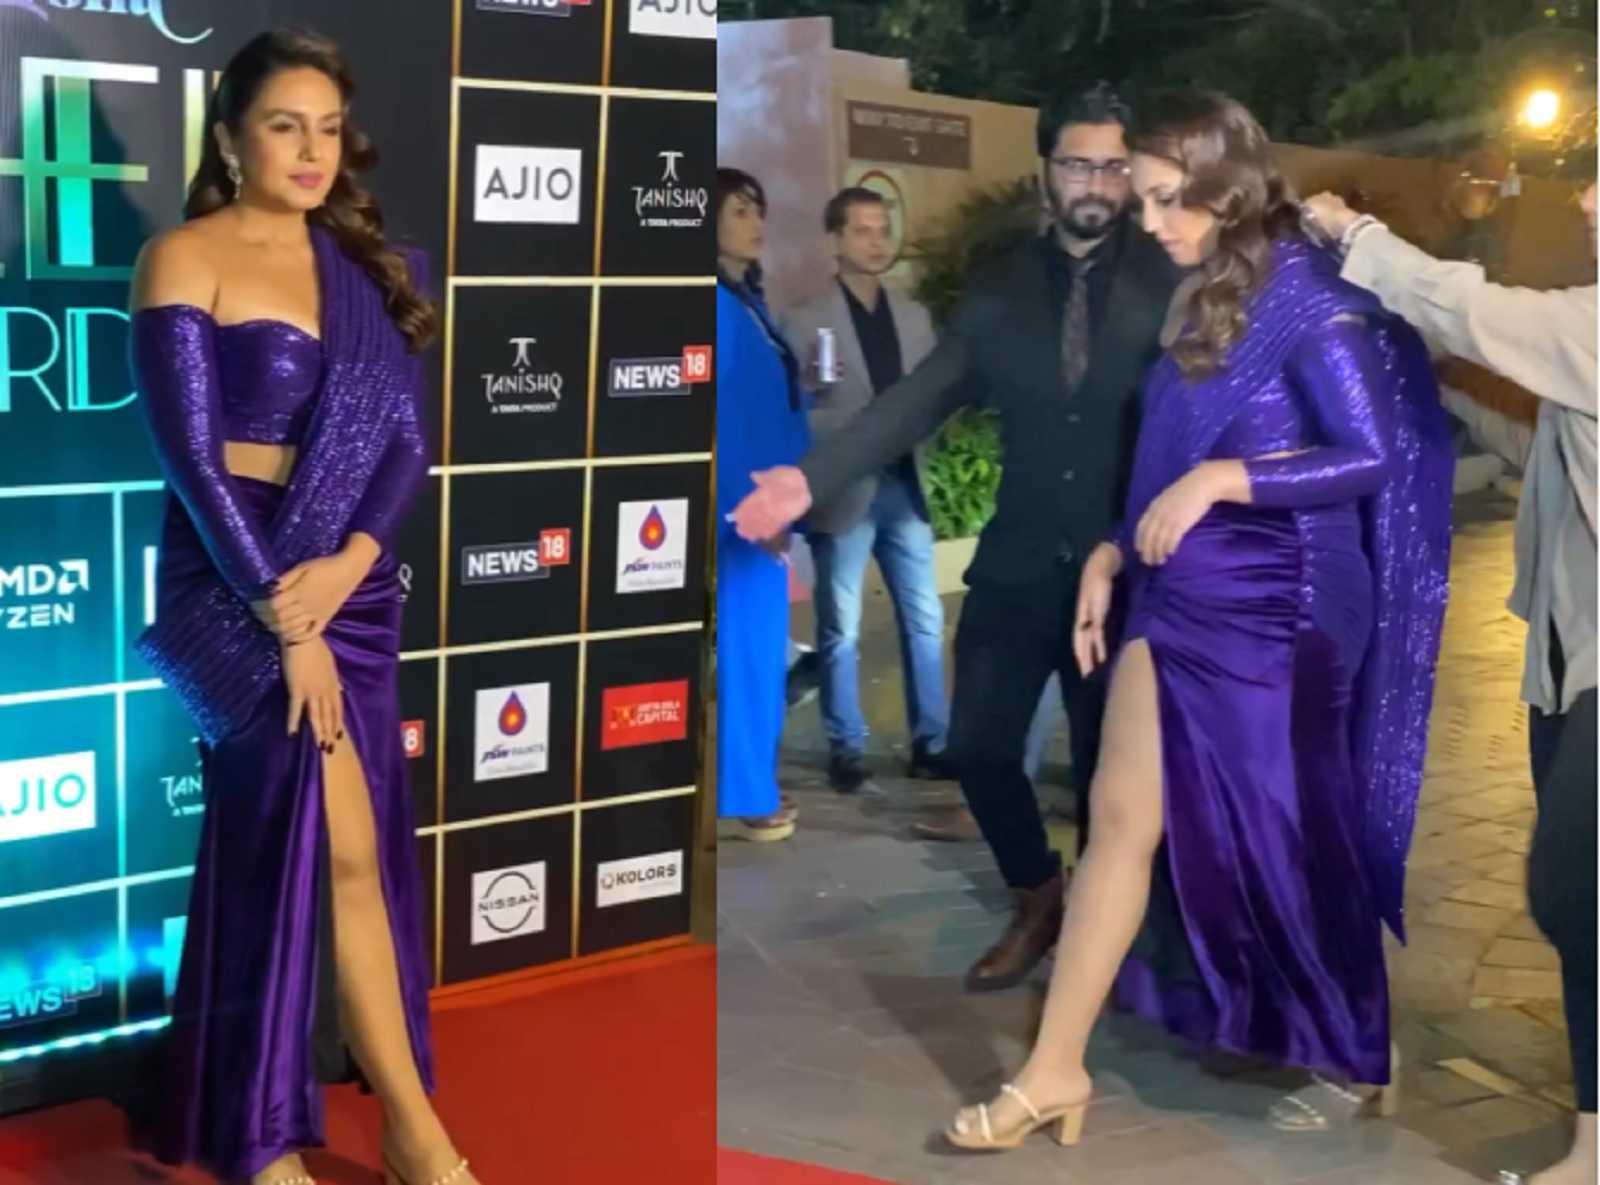 “Koi actress pregnant hai”: Huma Qureshi brutally trolled as she attends an award show wearing a purple outfit